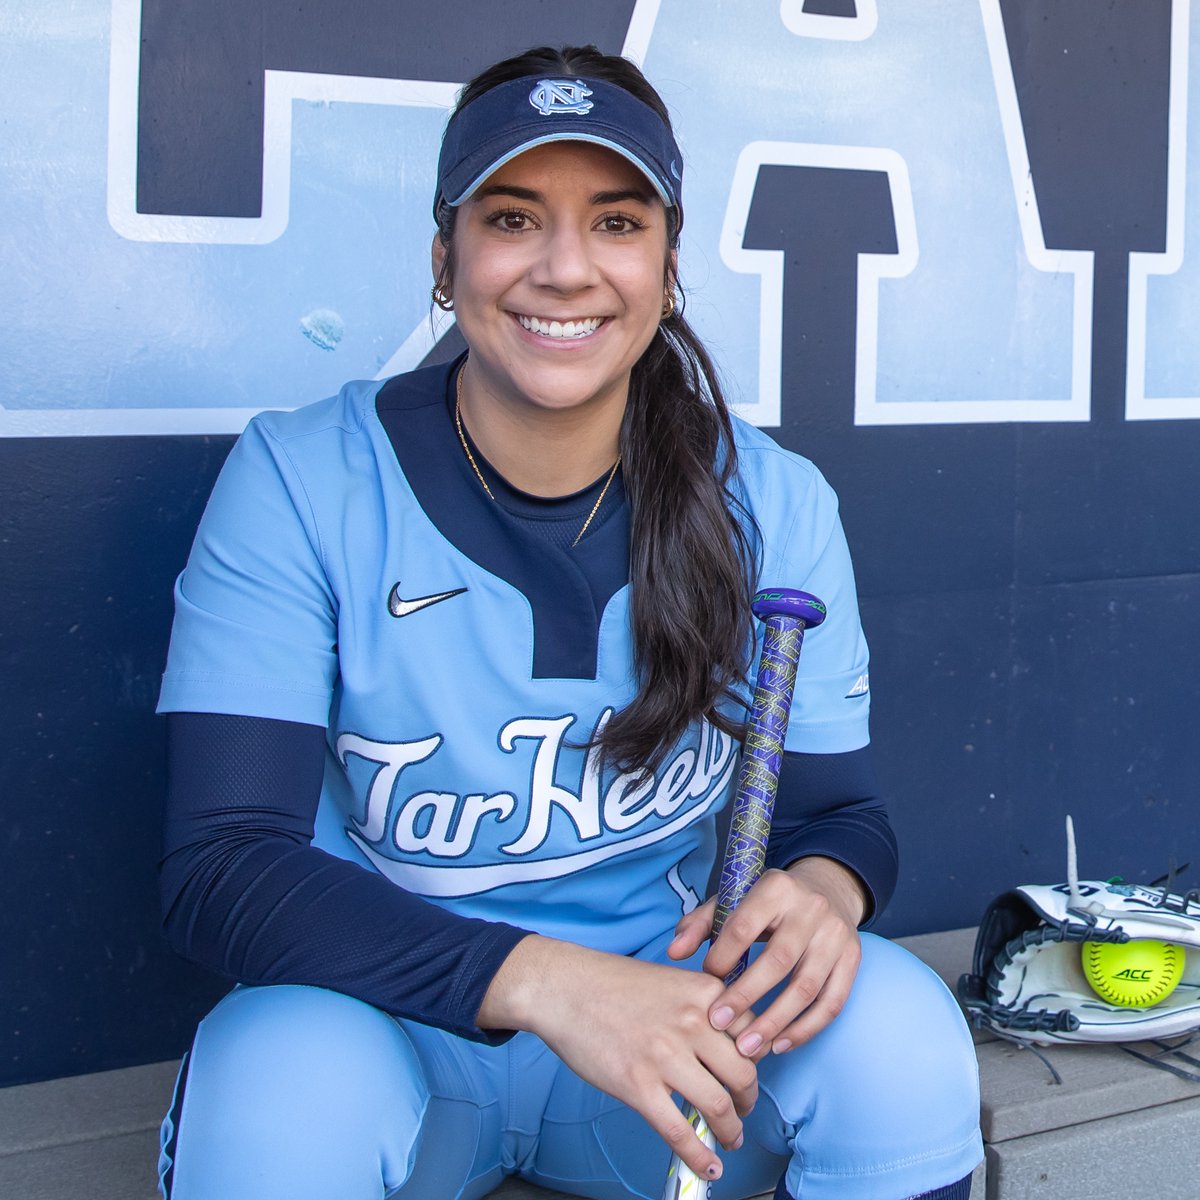 Three long balls today for our home run queen 👑 #GoHeels